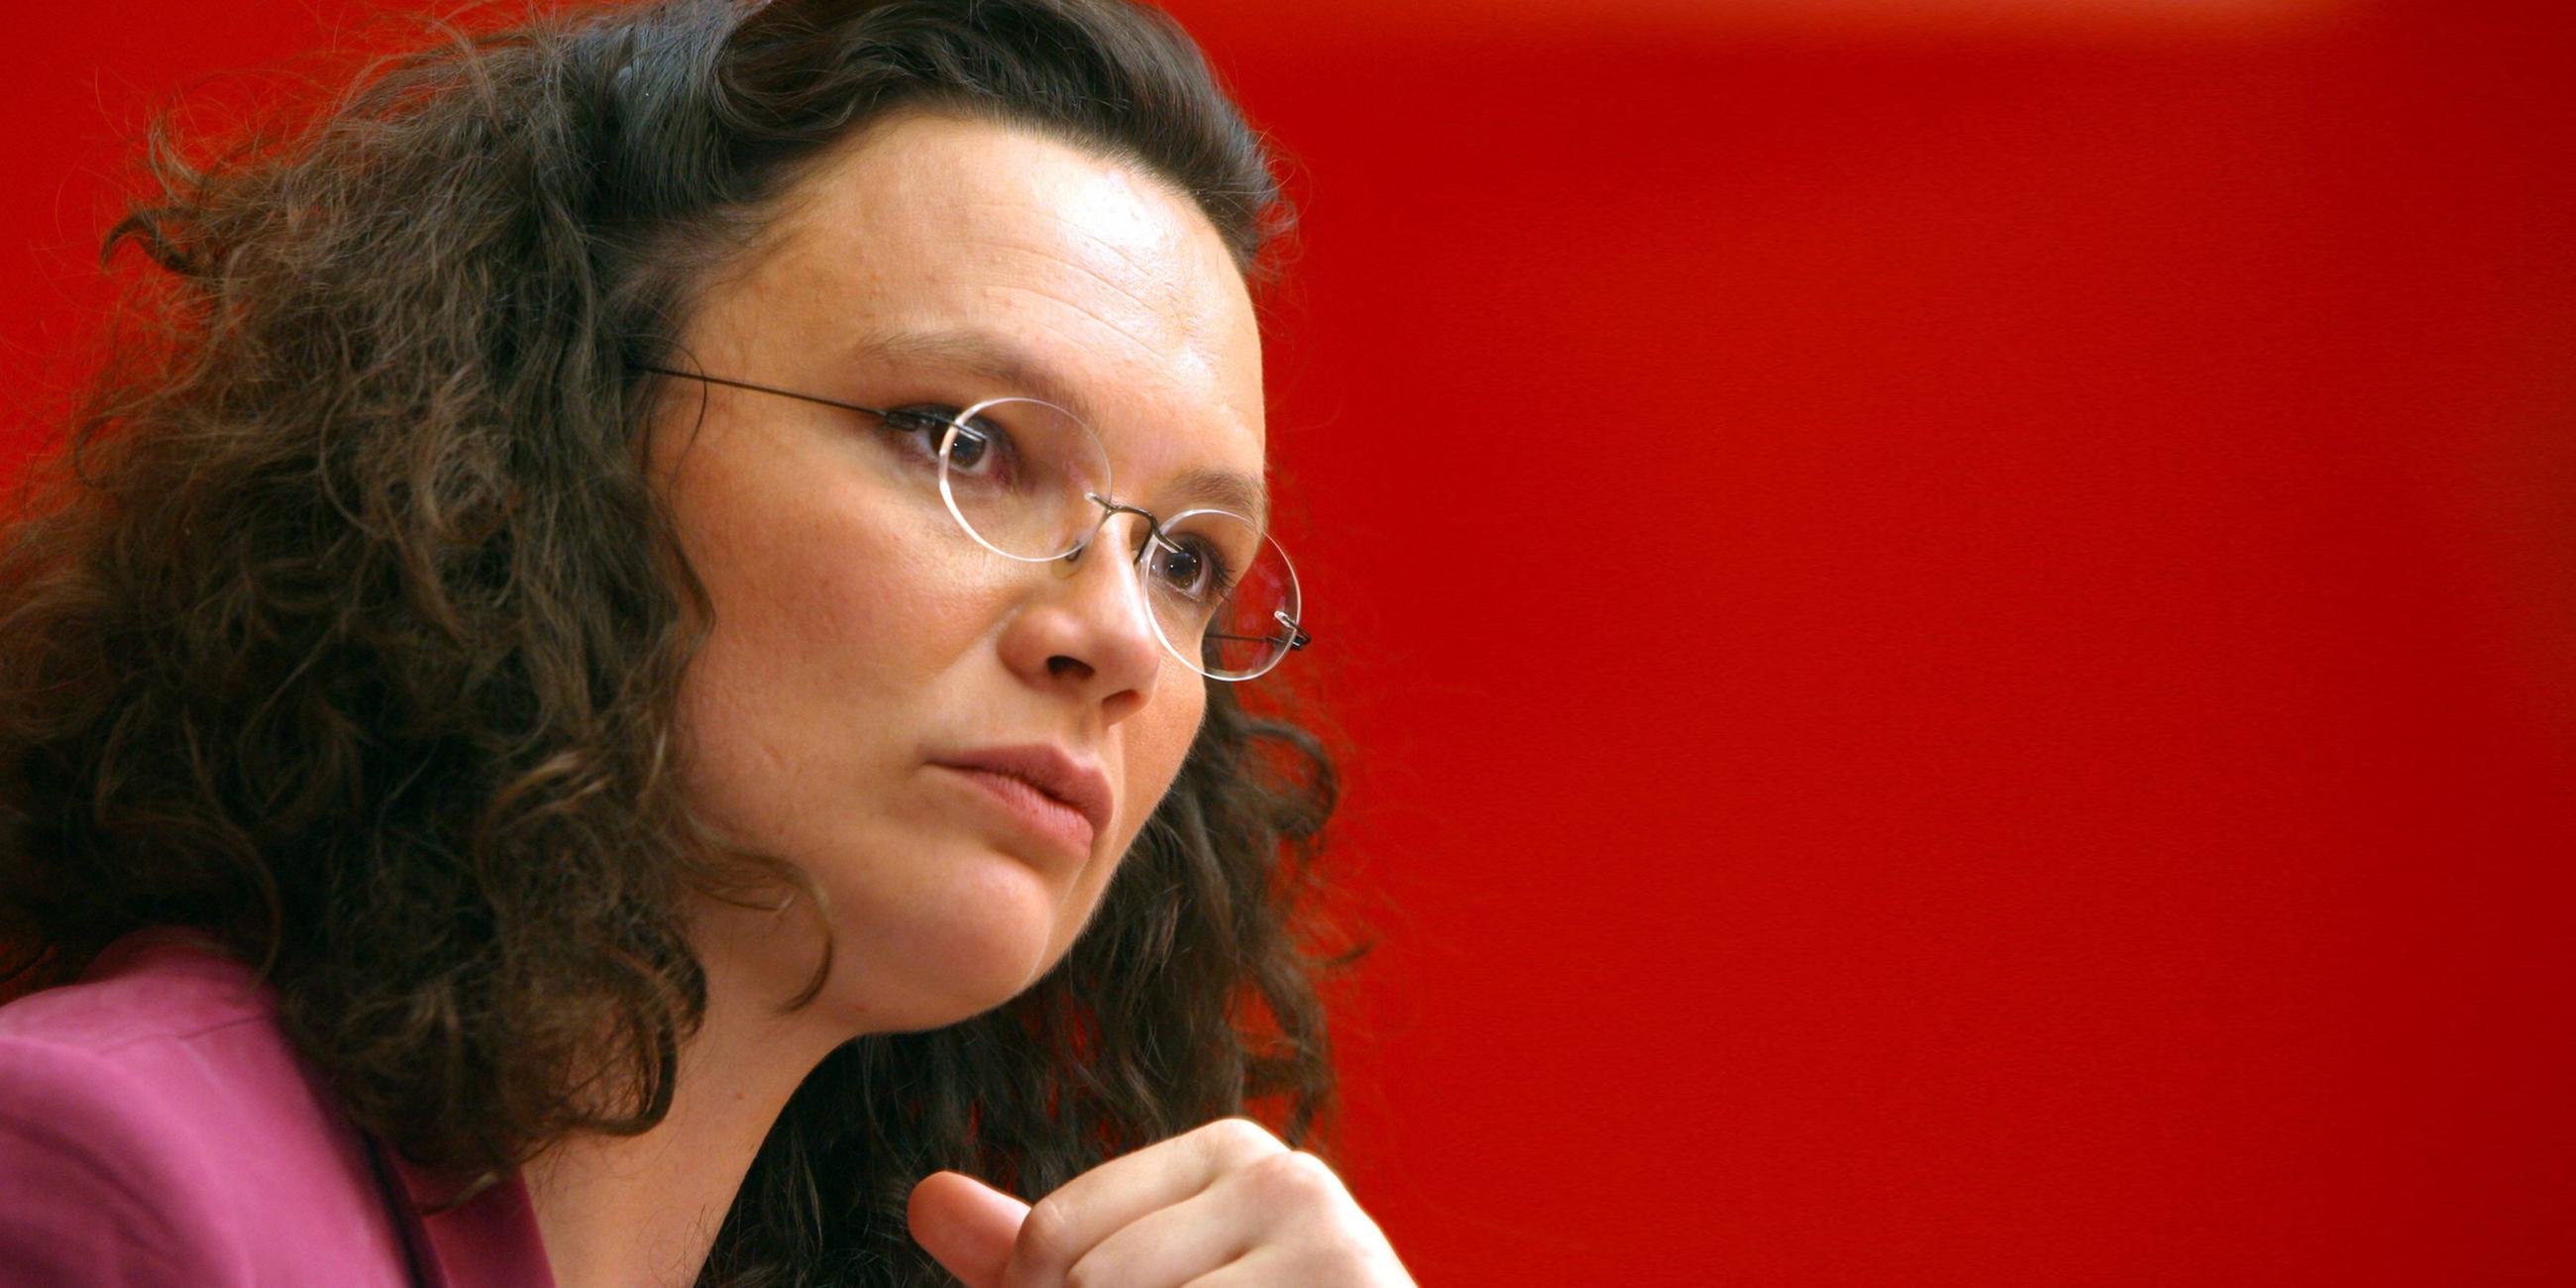 Archiv: Andrea Nahles am 16.06.2004 in Berlin